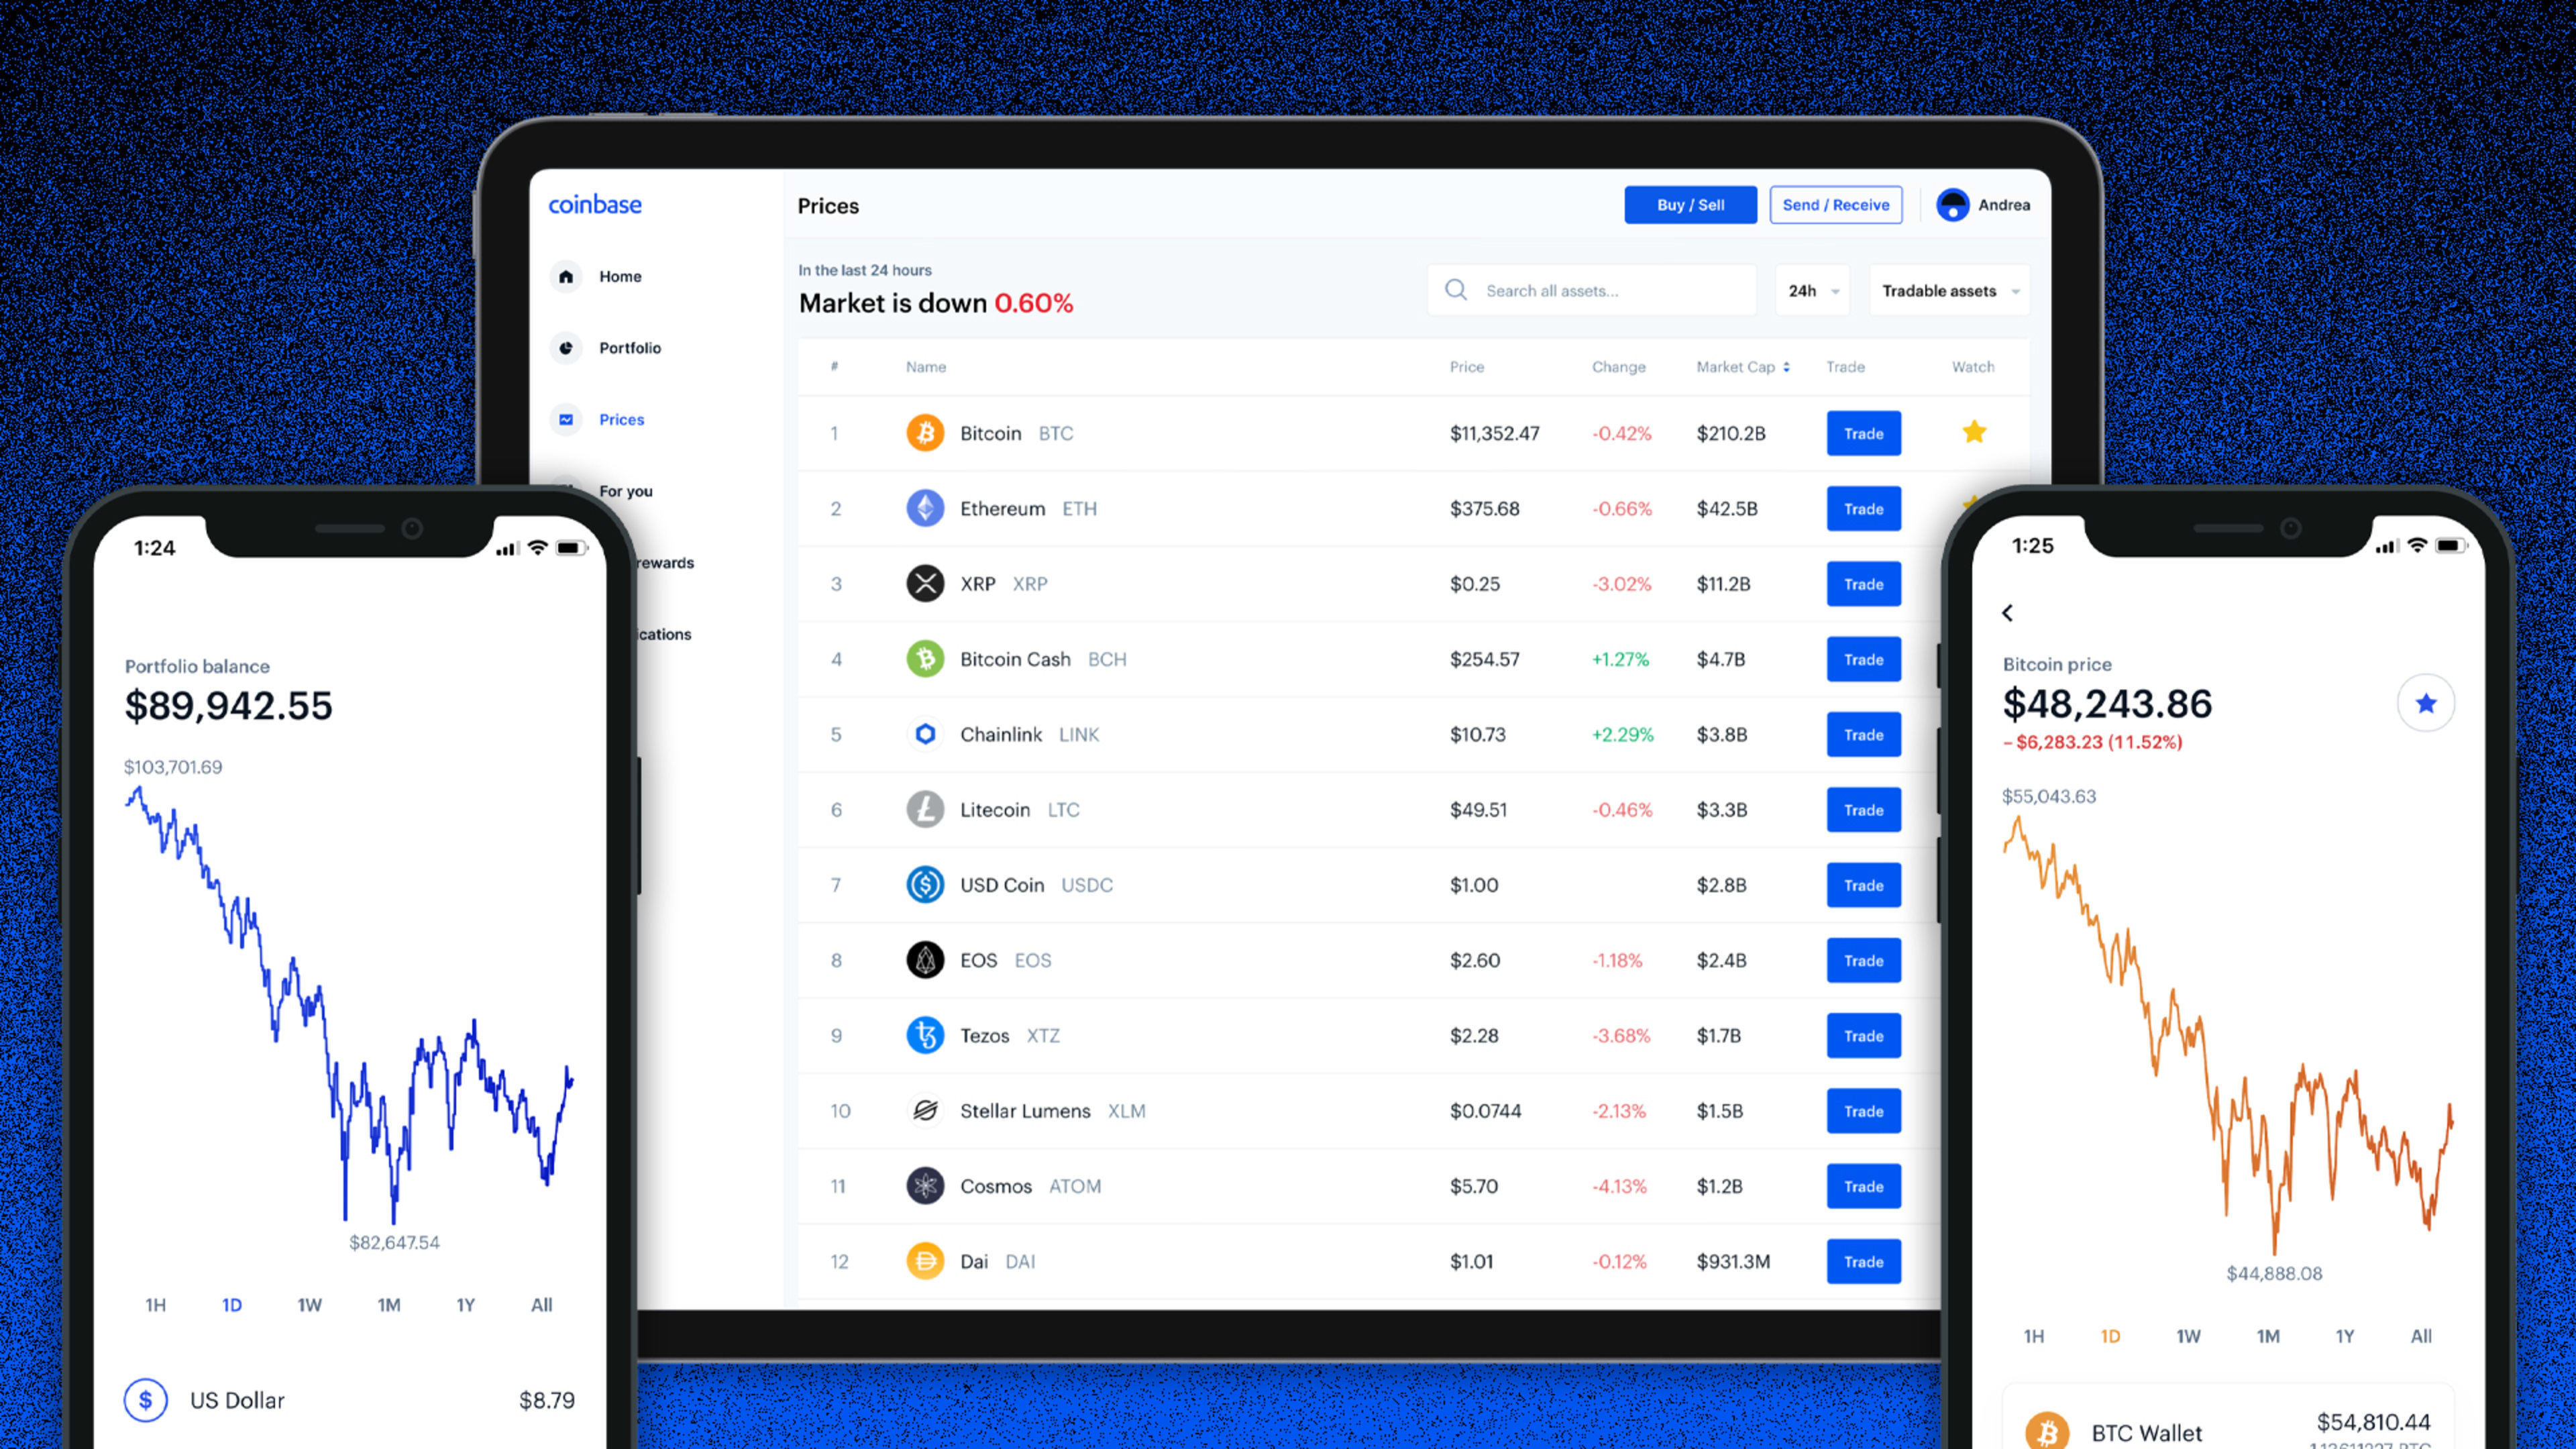 It’s okay if you’re still confused about Coinbase. Let us explain why it matters now